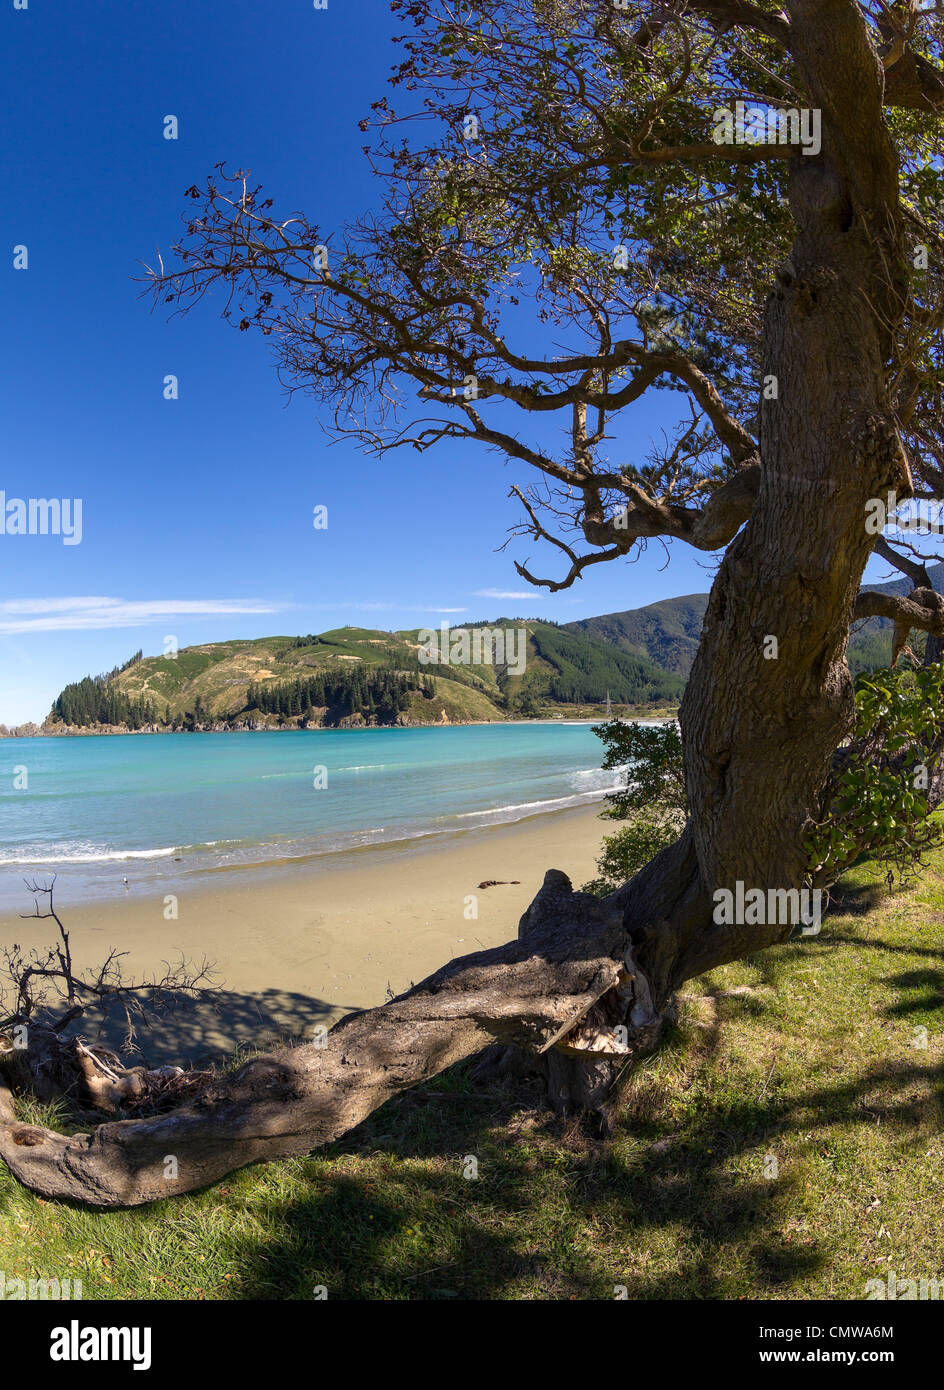 Beach at Robin Hood Bay in the Marlborough district of New Zealand, looking  out towards Cloudy Bay Stock Photo - Alamy